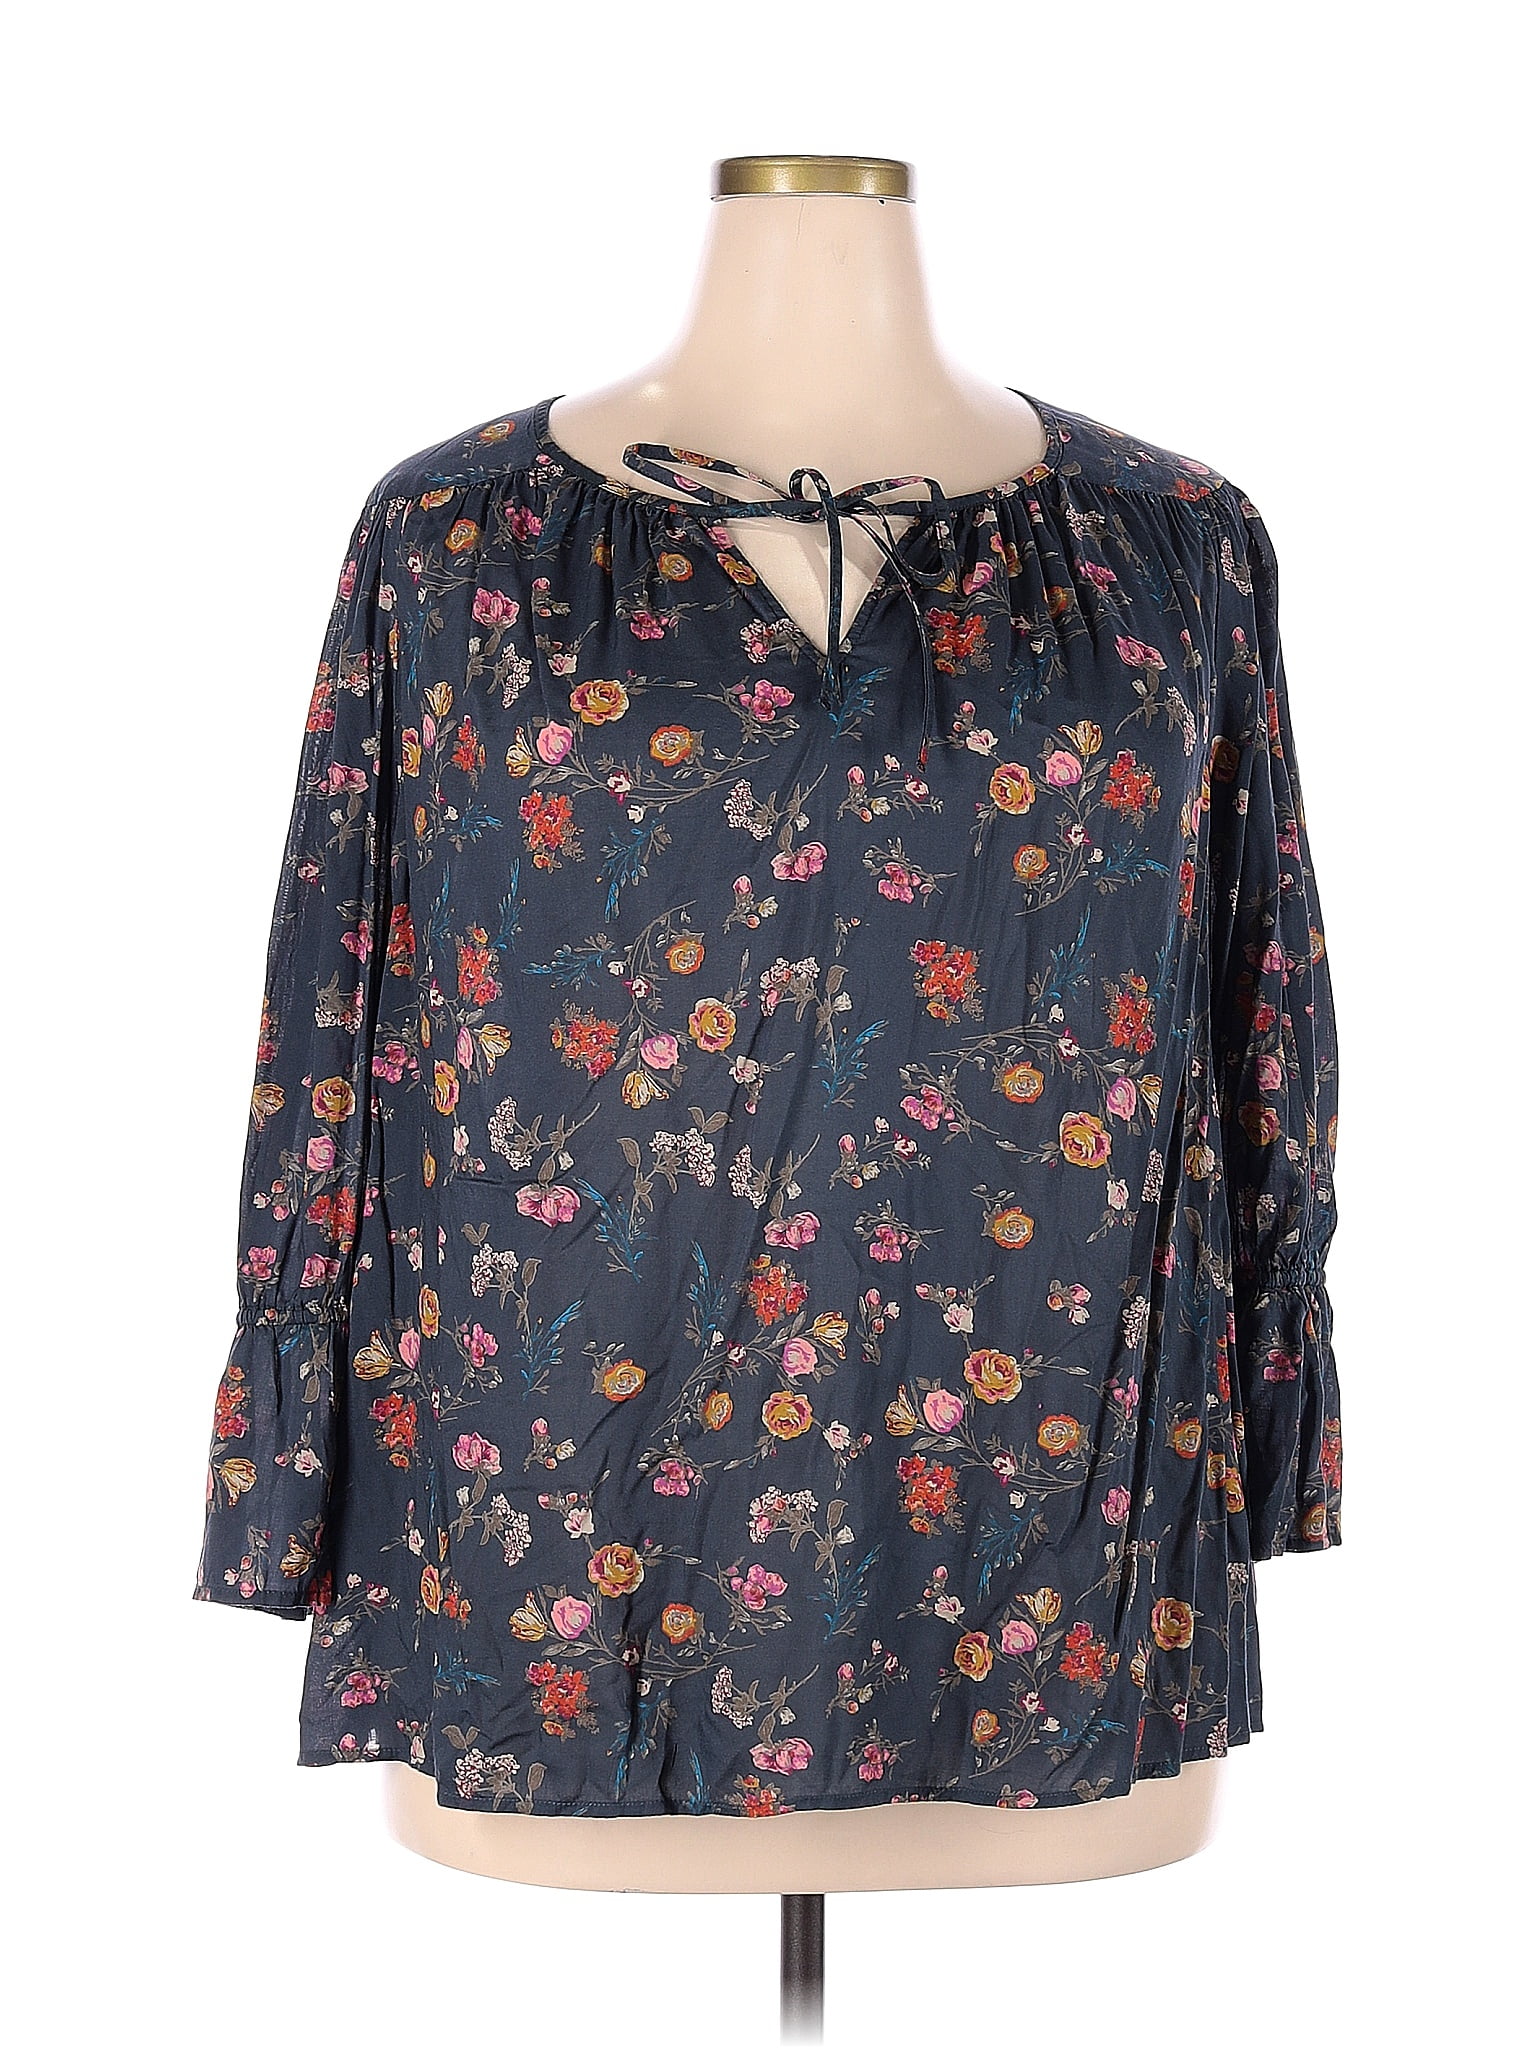 Blouse Long Sleeve By Lucky Brand O Size: Xl